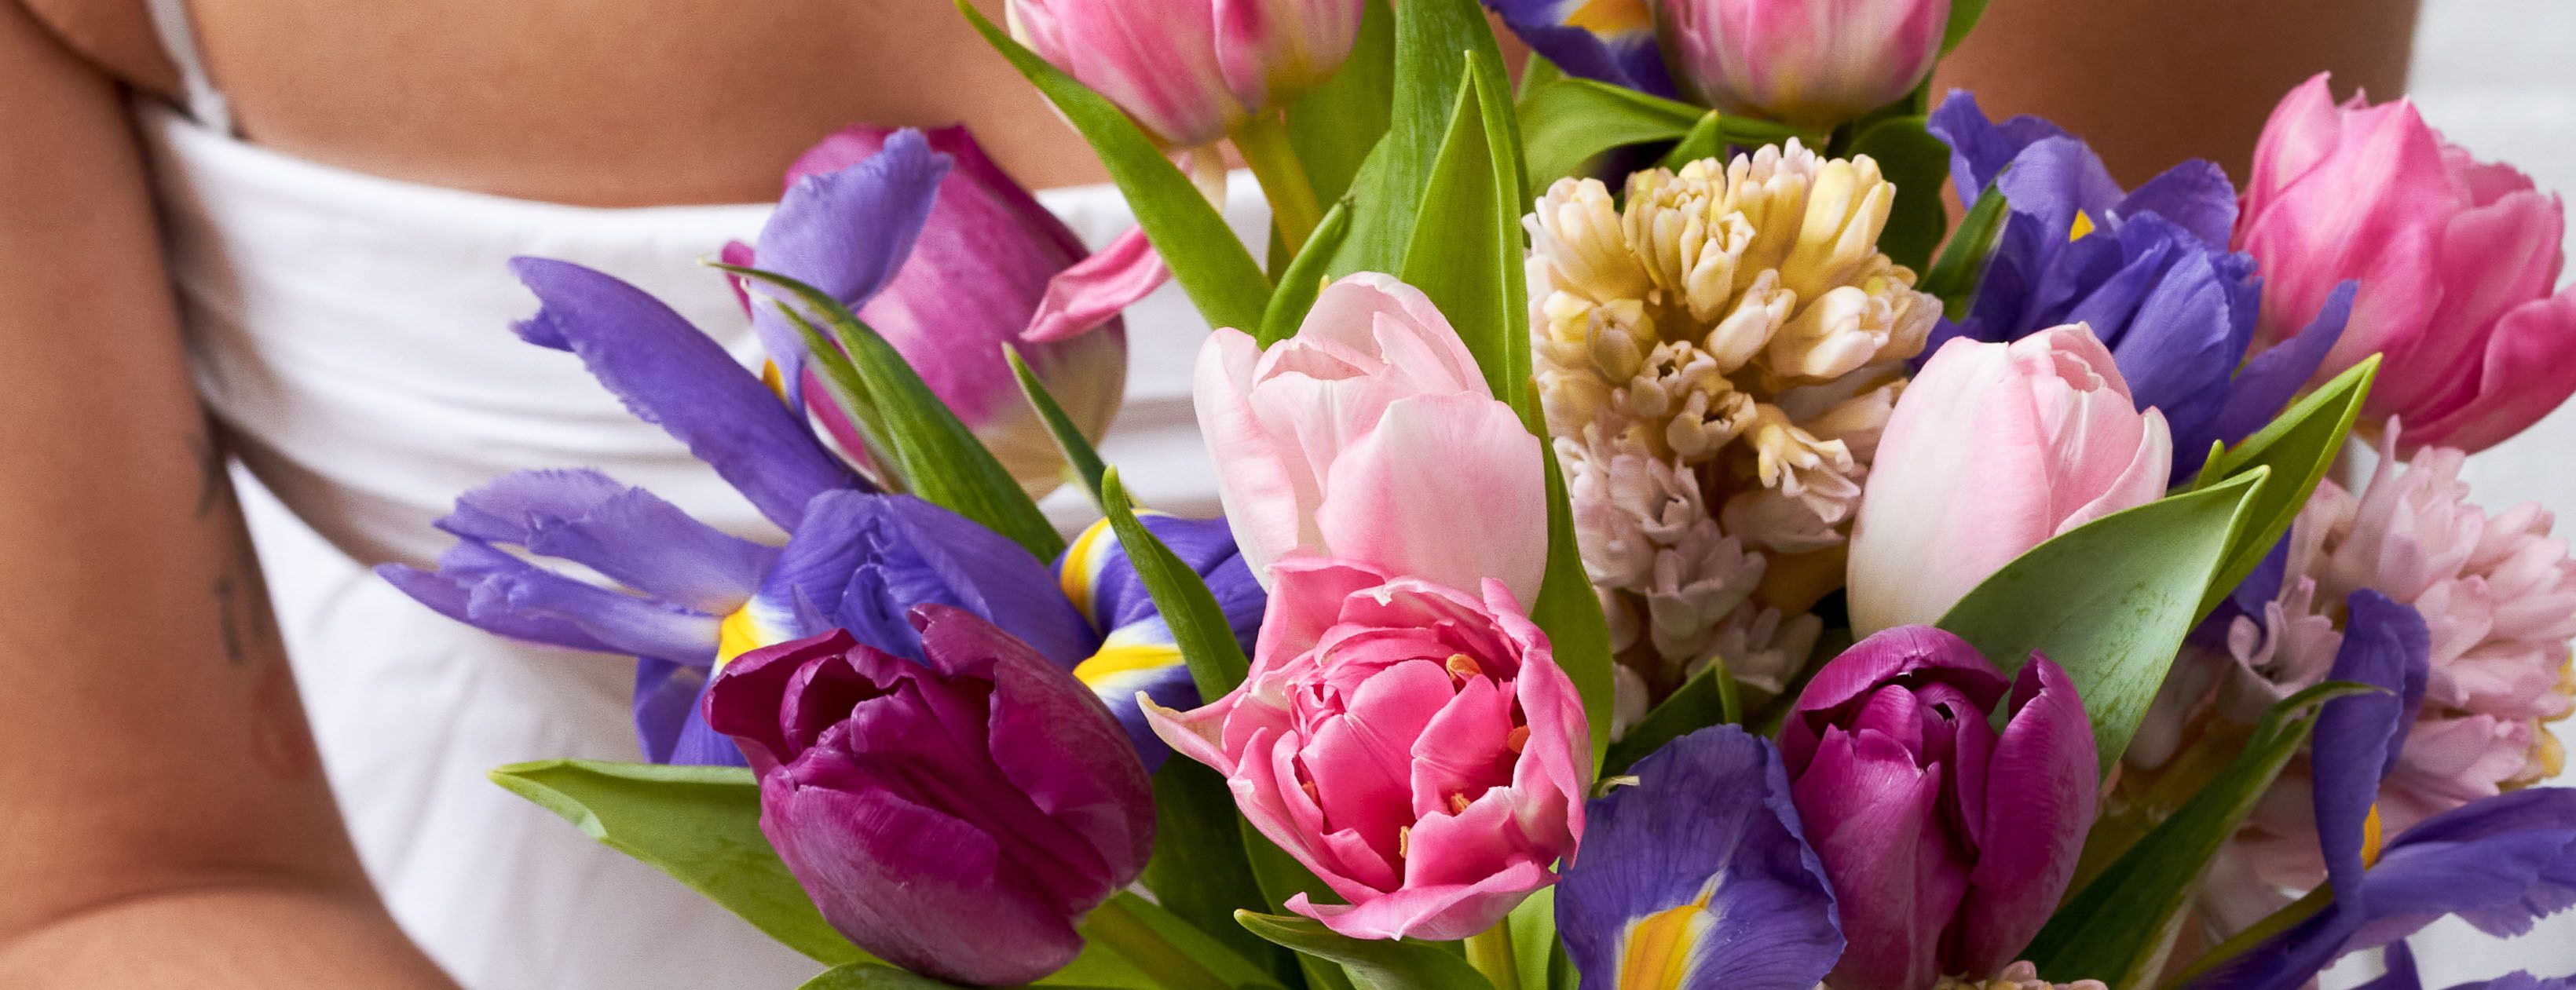 Close up of flower bouquet containing April birth flowers